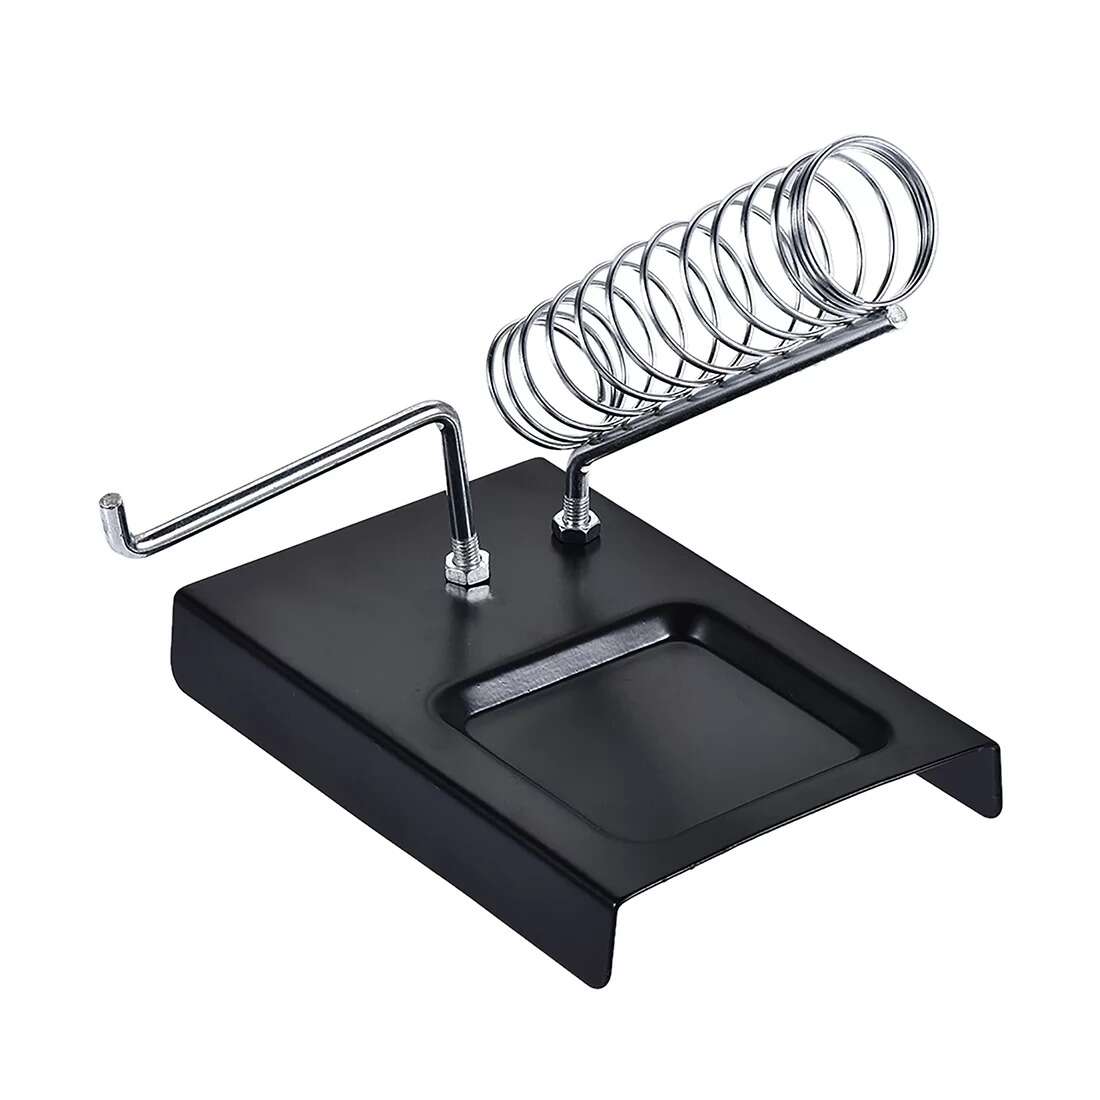 Soldering Iron Holder,Soldering Iron Stand Spring Holders Support